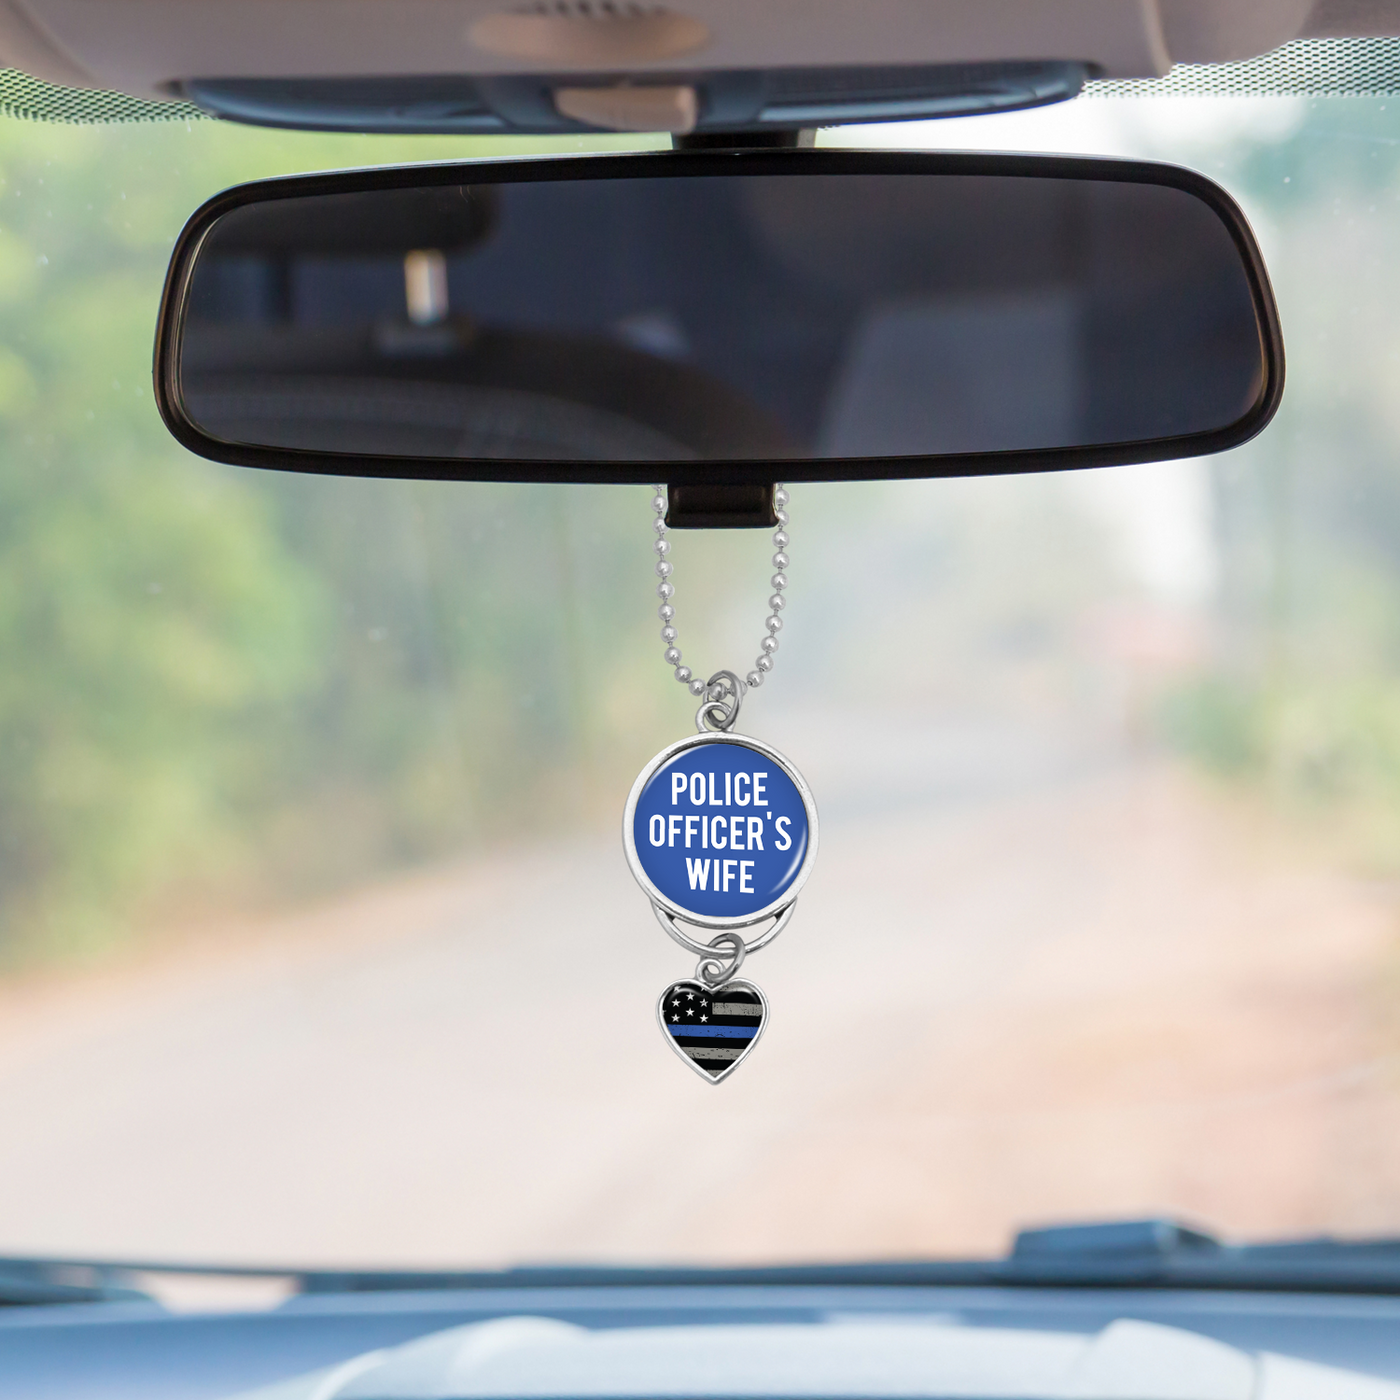 Police Officer's Wife Rearview Mirror Charm